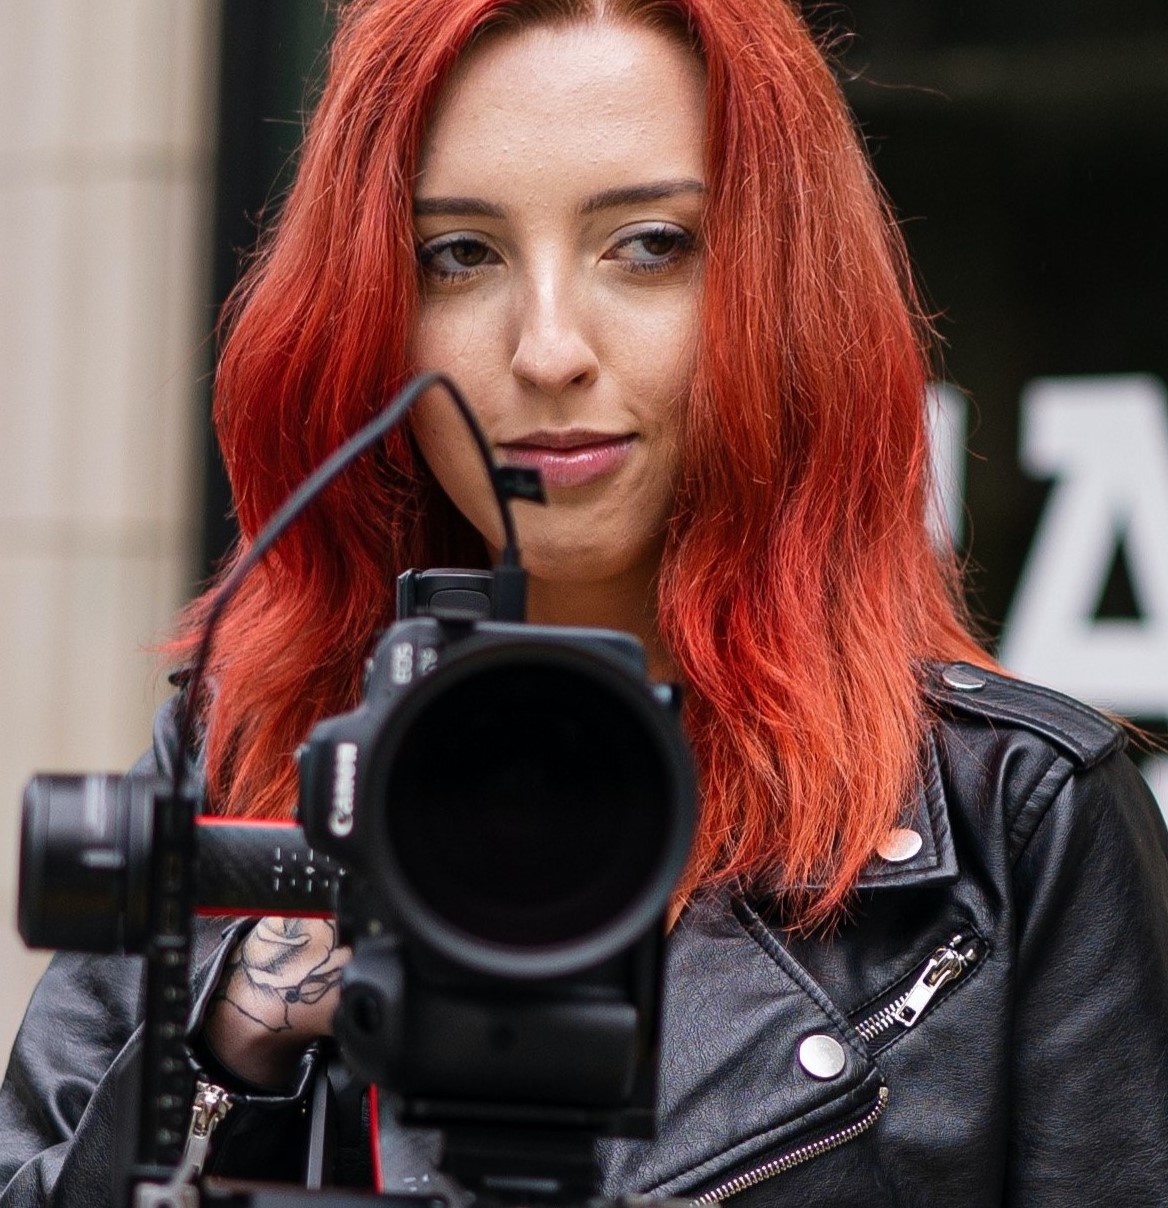 Woman director holding camera- wearing black leather jacket with bright red hair